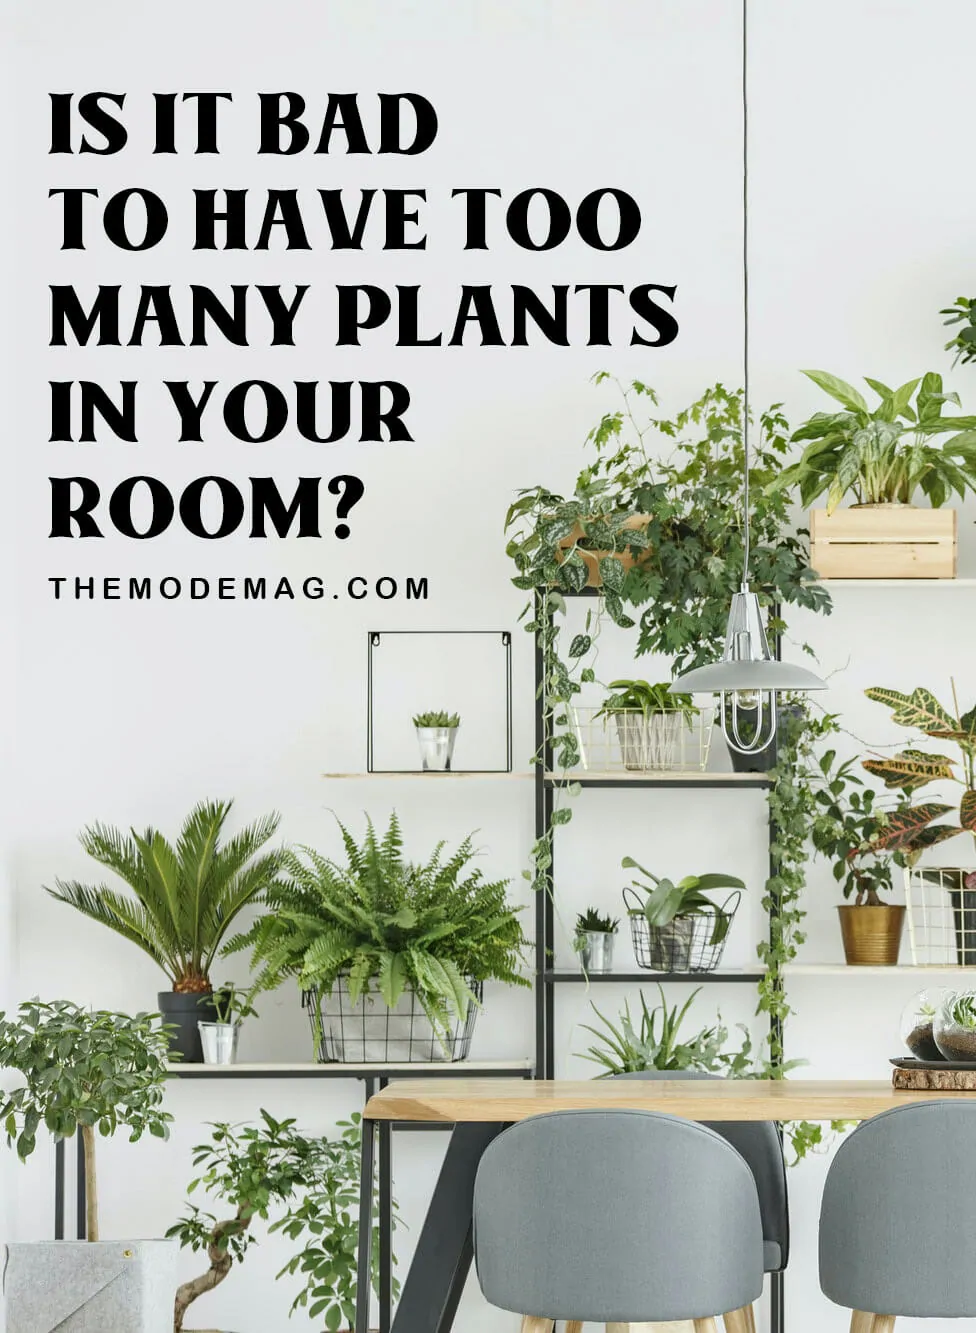 Is It Bad to Have too Many Plants In Your Room?